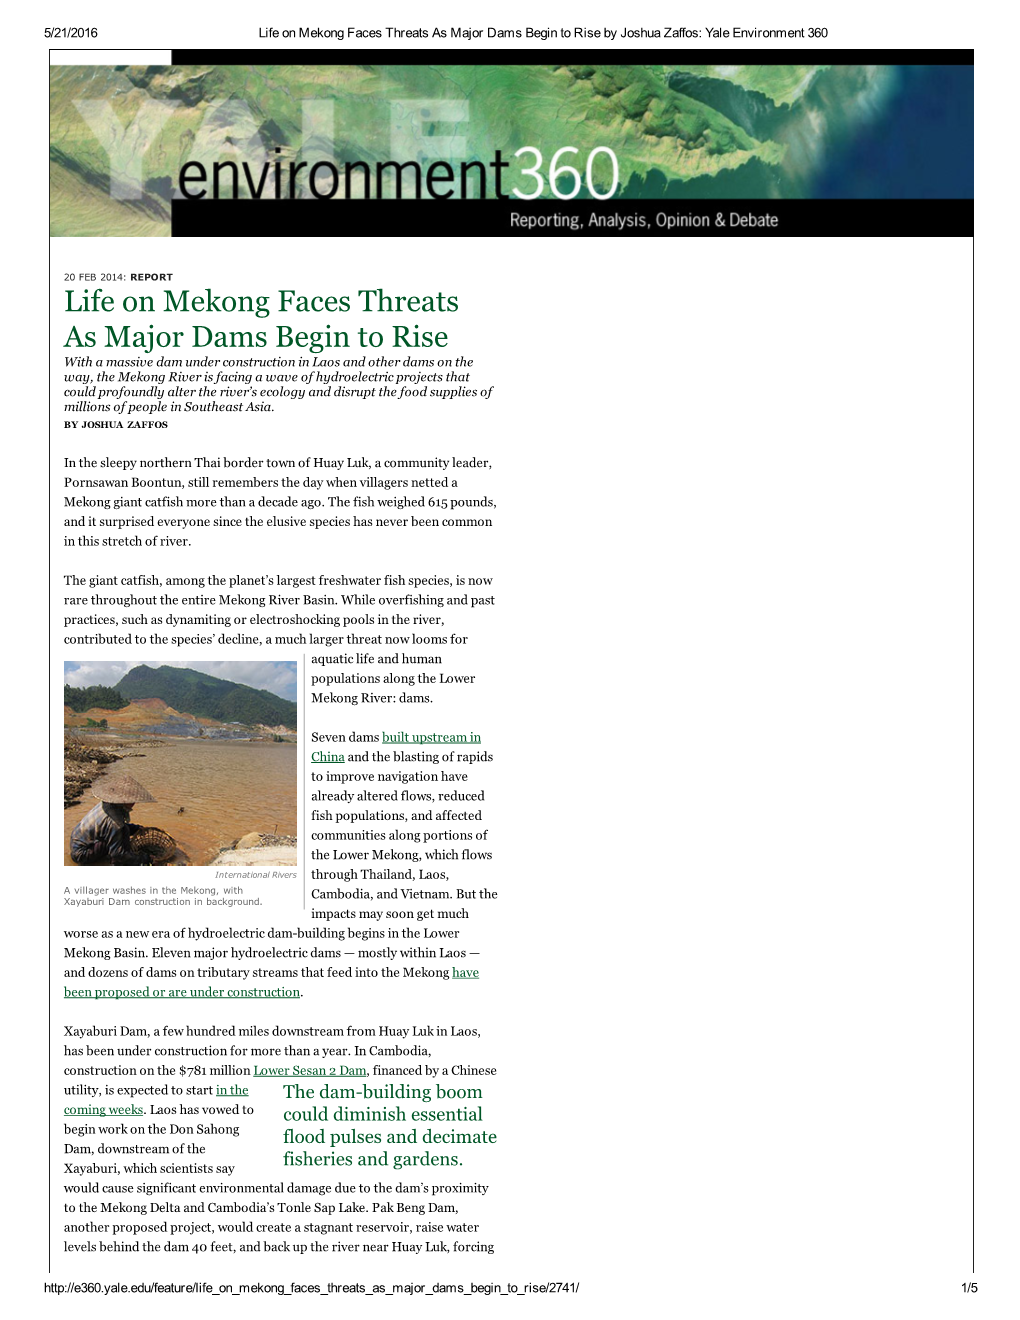 Life on Mekong Faces Threats As Major Dams Begin to Rise by Joshua Zaffos: Yale Environment 360